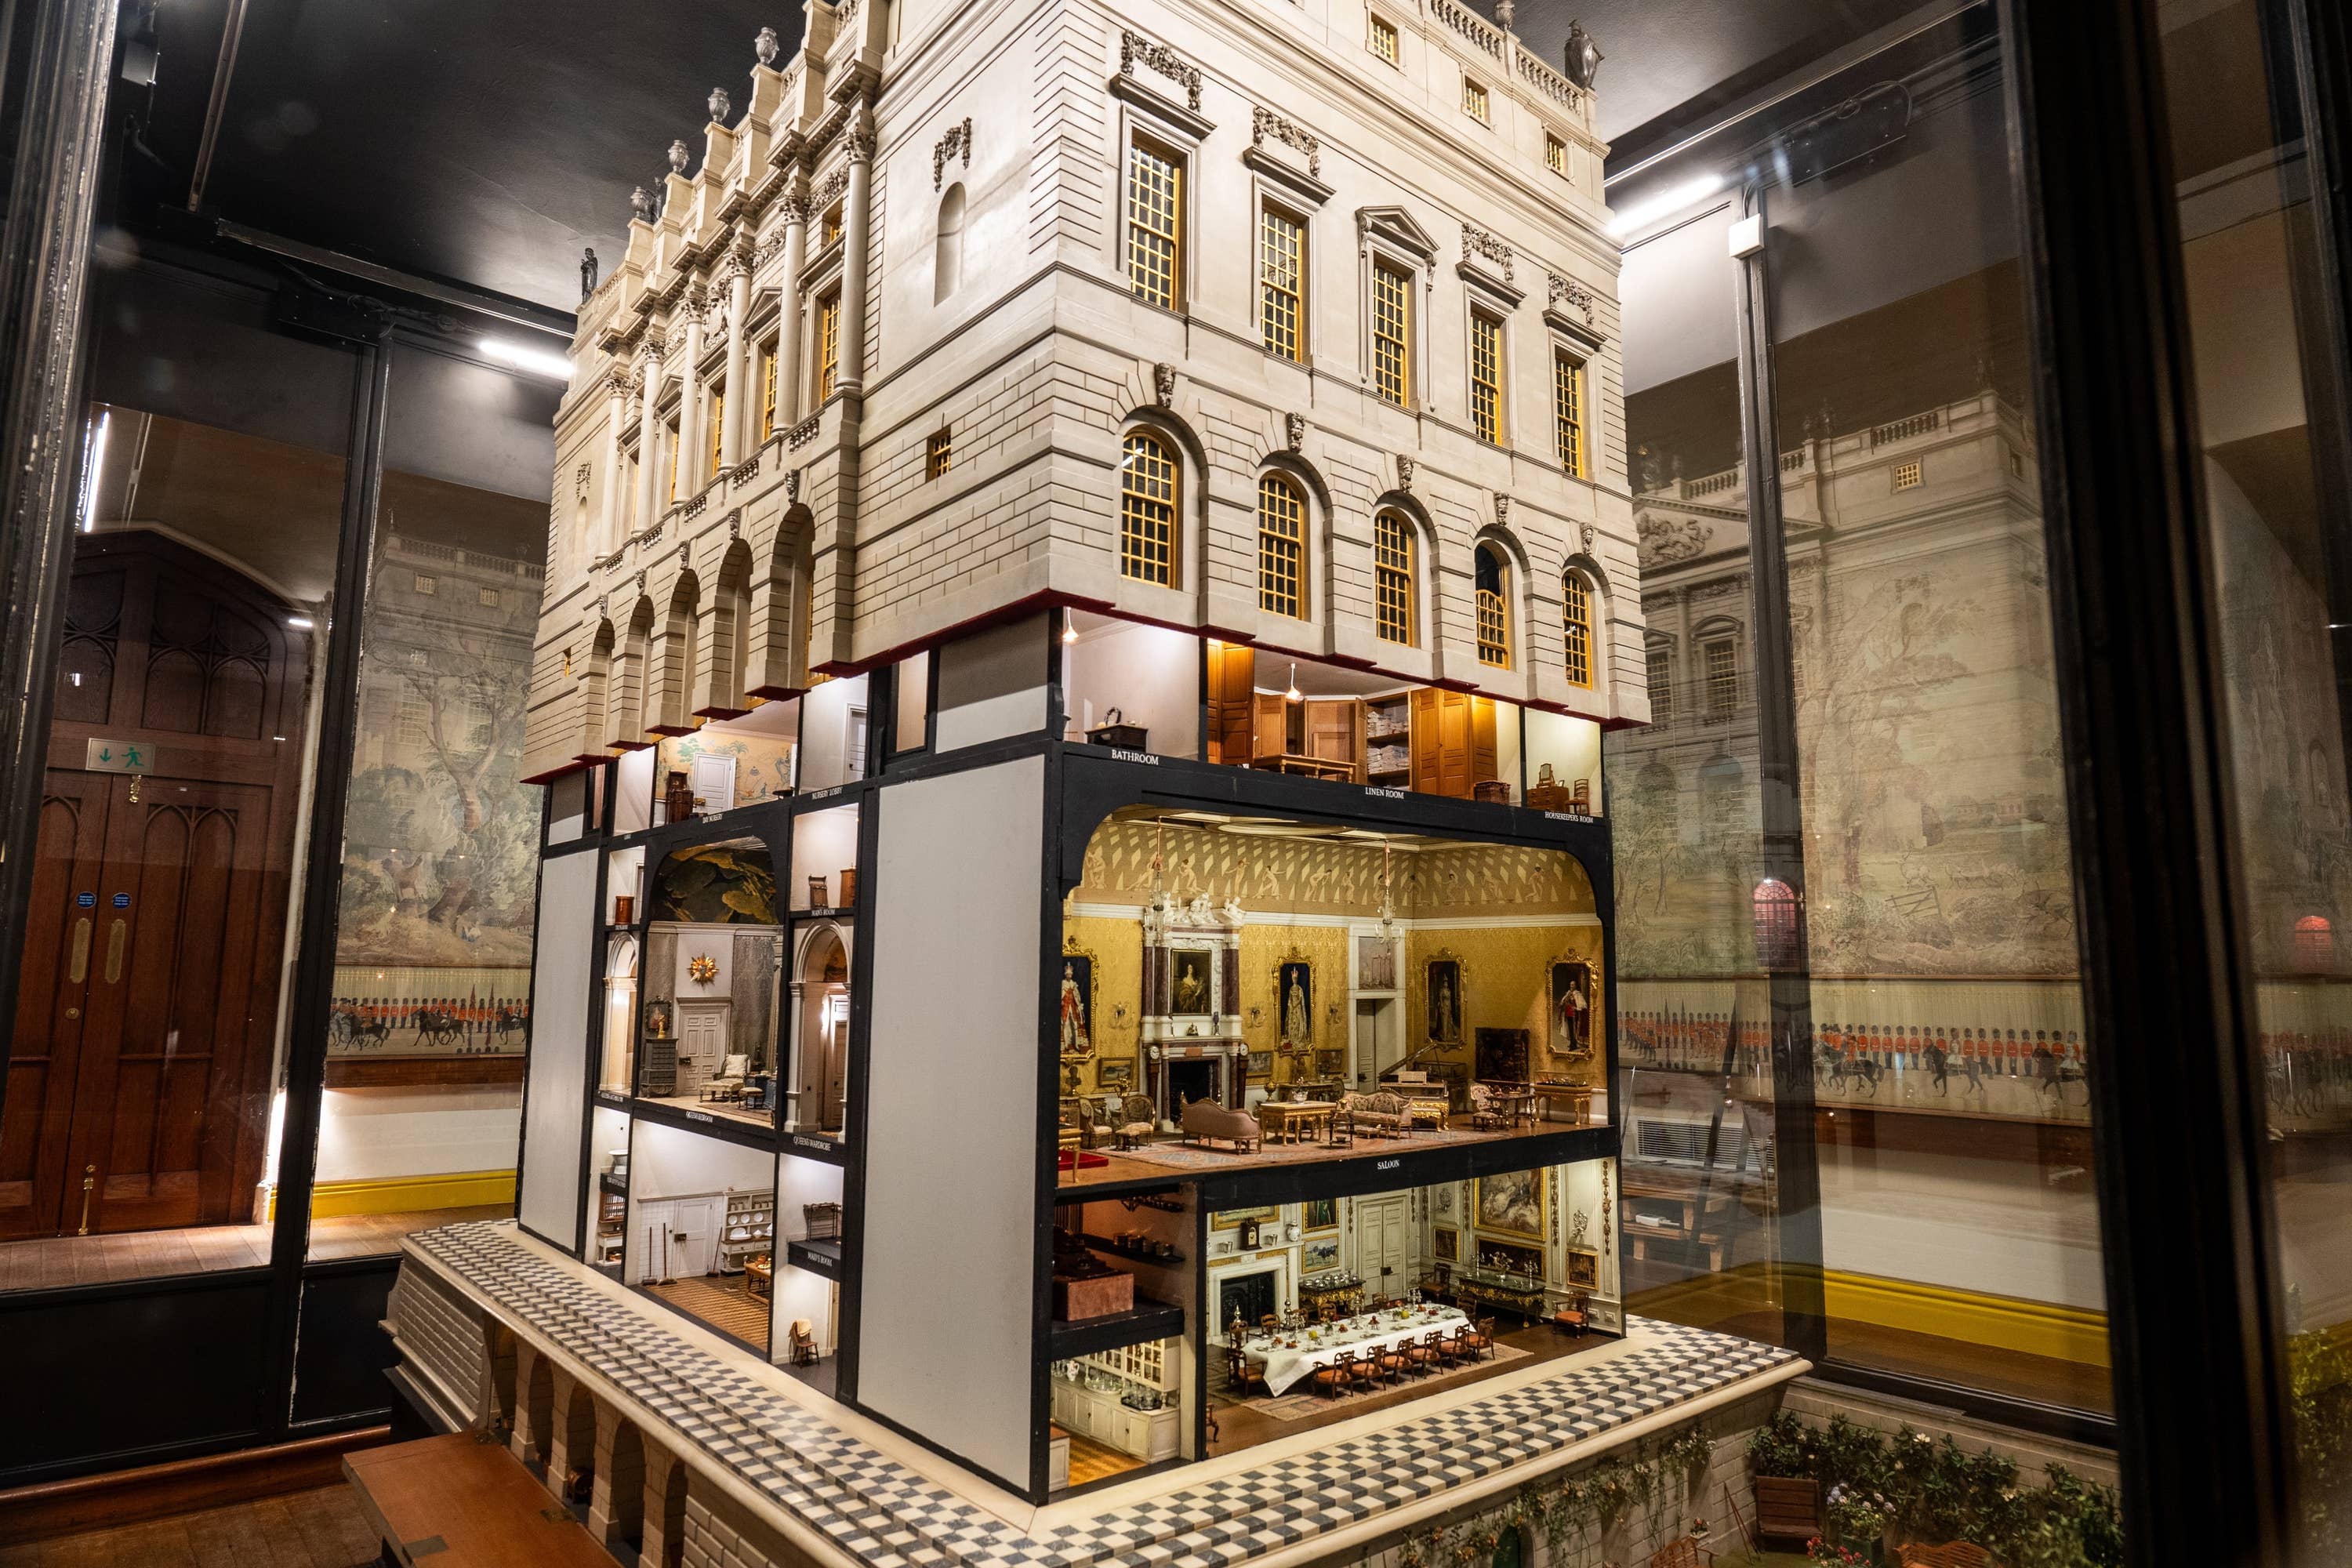 Queen Mary’s Dolls’ House on show at Windsor Castle (King Charles III/Royal Collection Trust/PA).